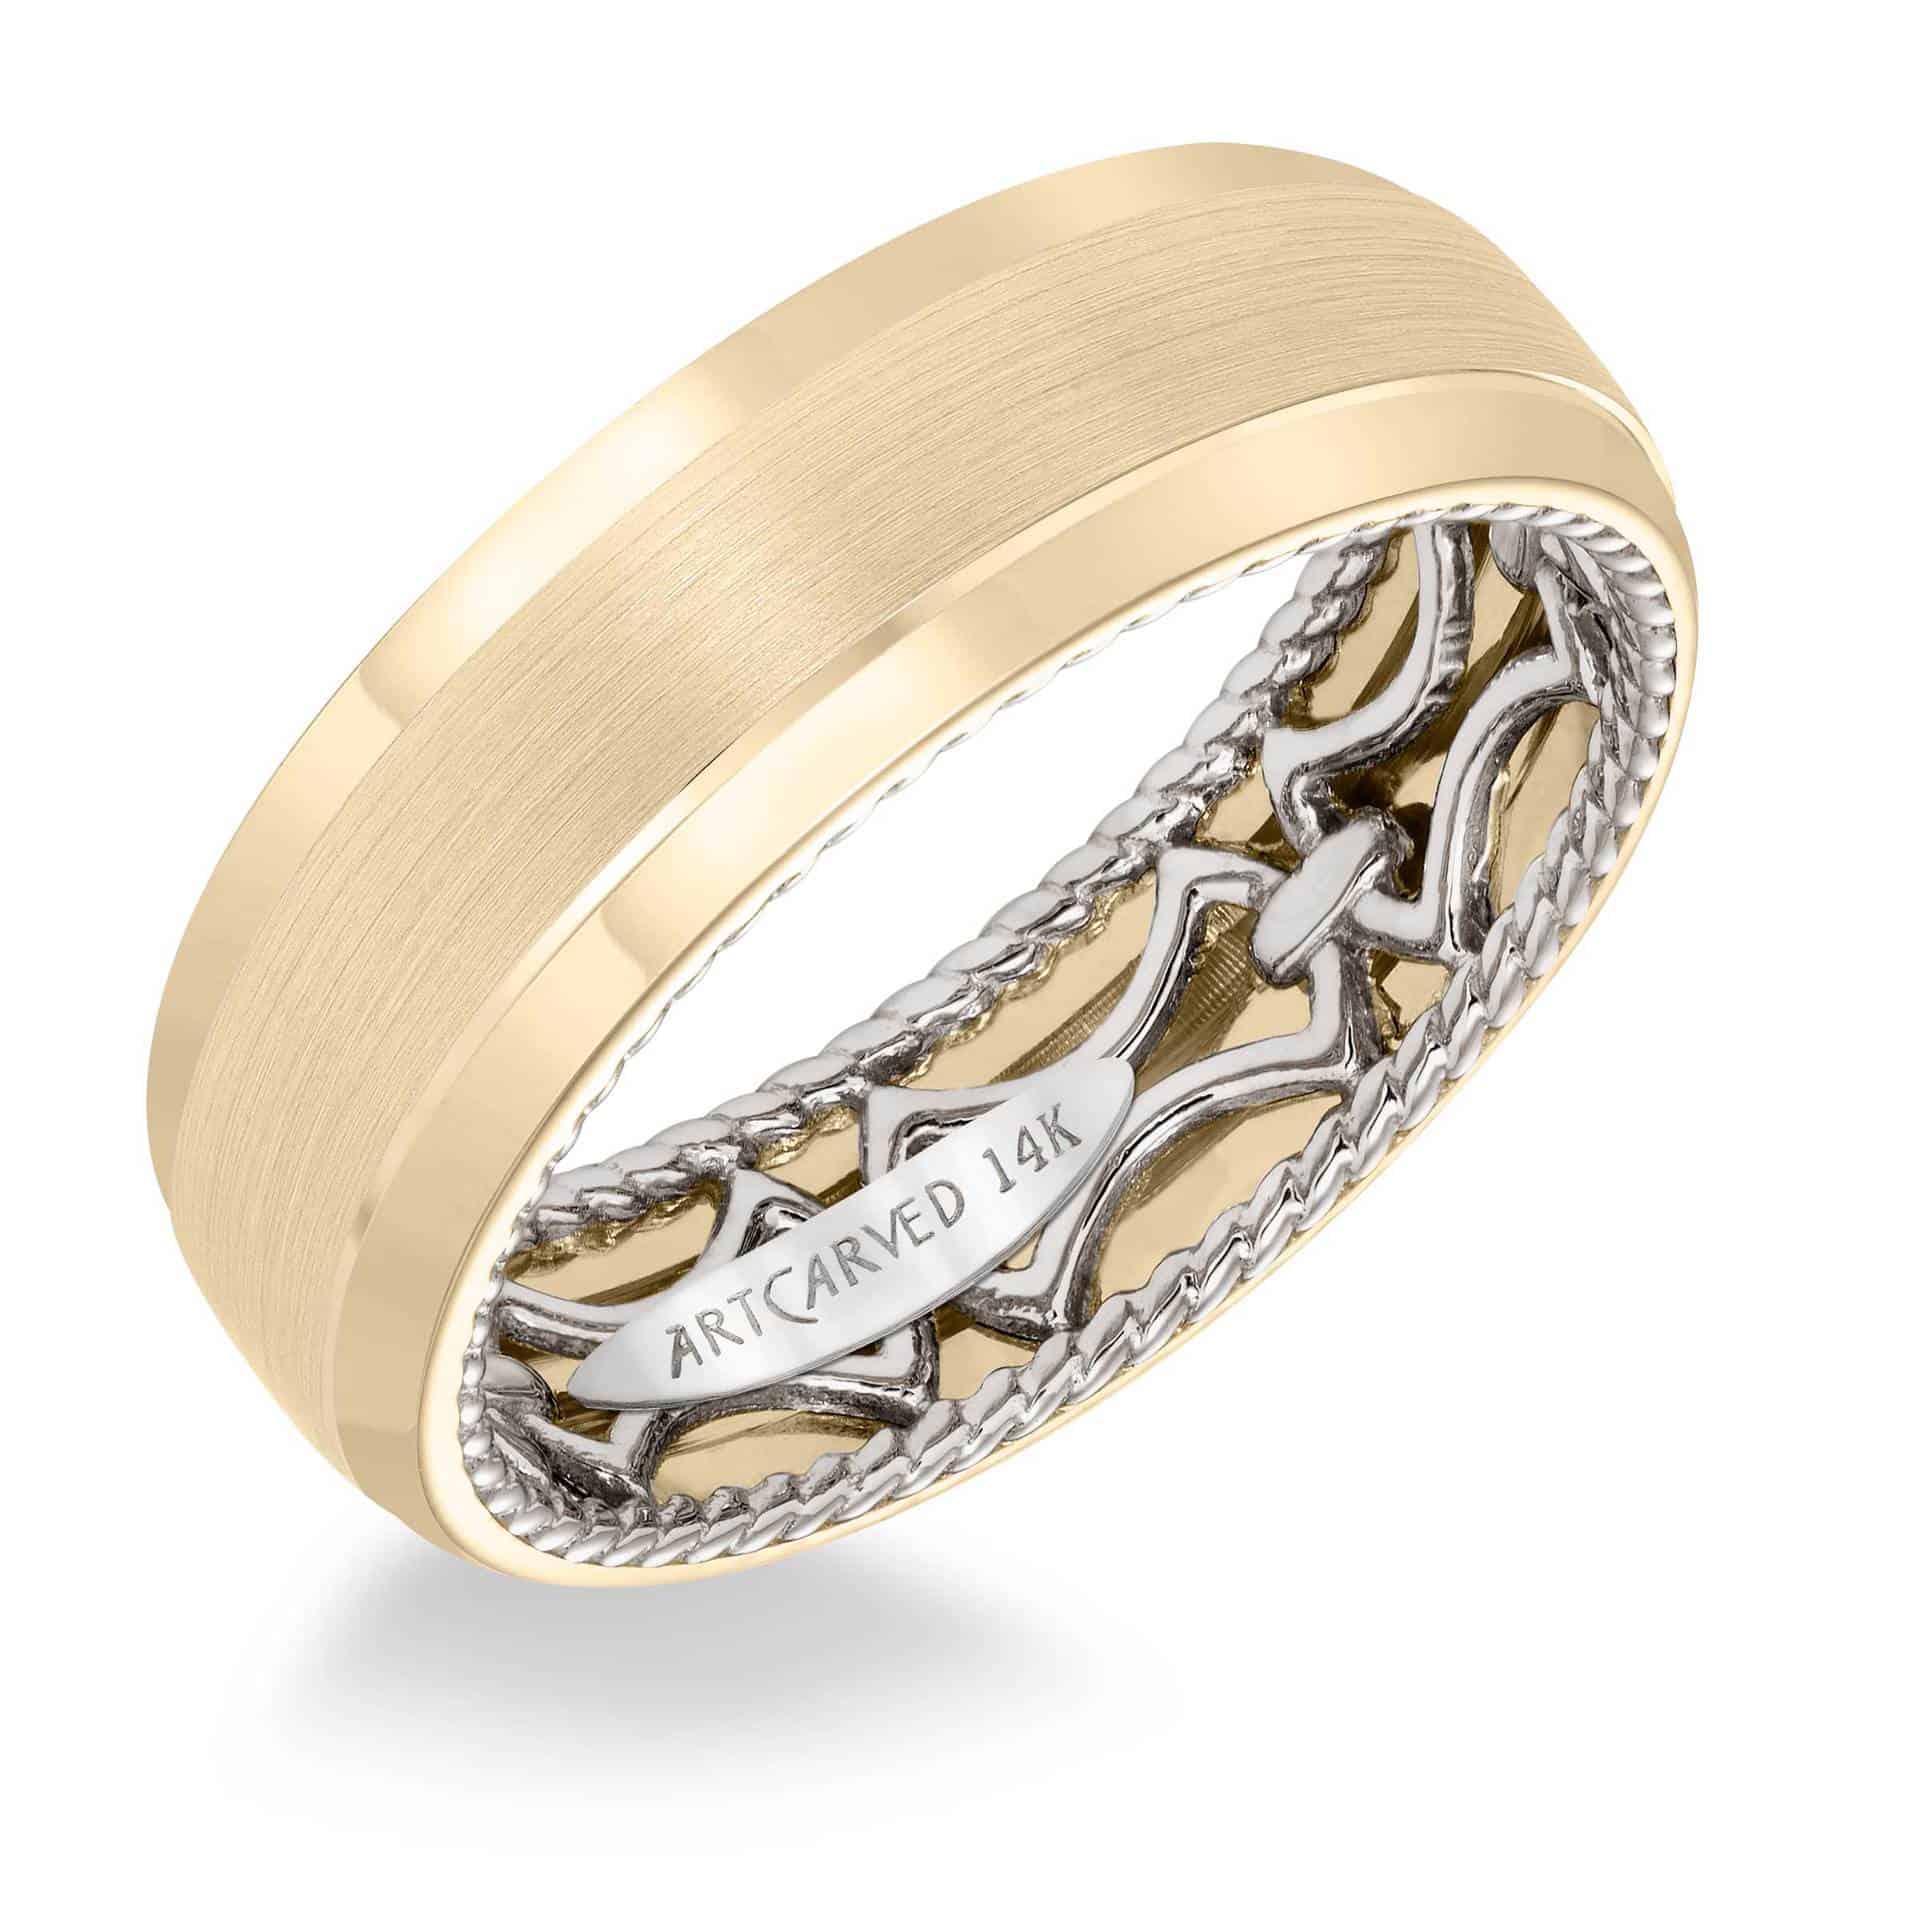 ArtCarved Men's Wedding Band with Link Pattern, Rope